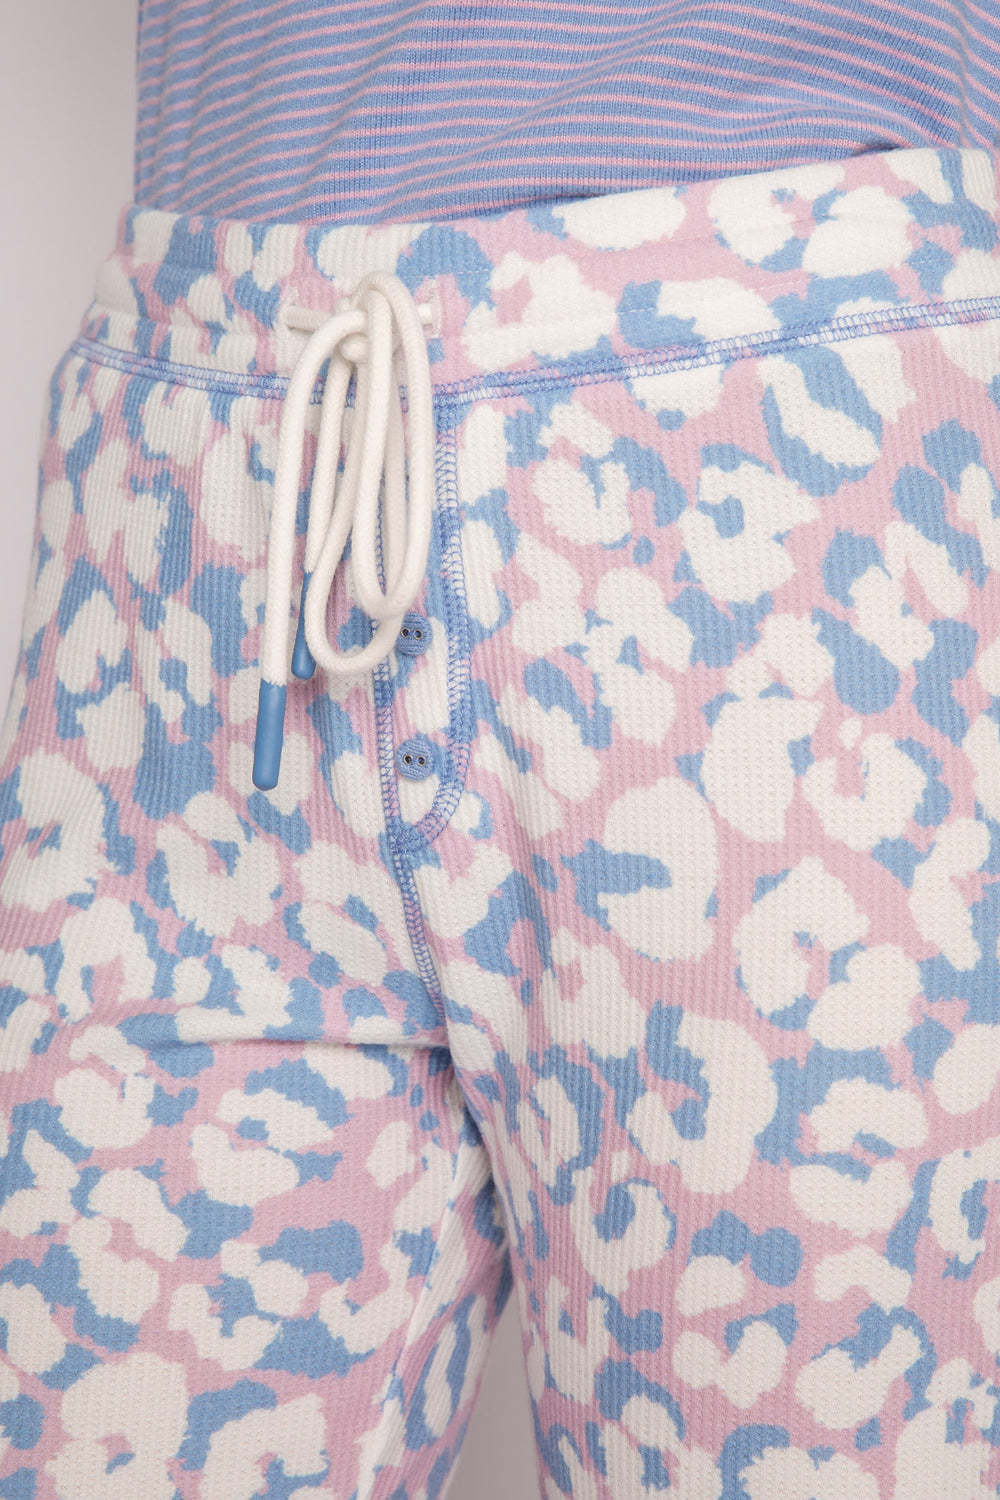 Brushed knit jammie pant in ivory-blue-lilac leopard print. Striped banded cuffs. (7231875317860)